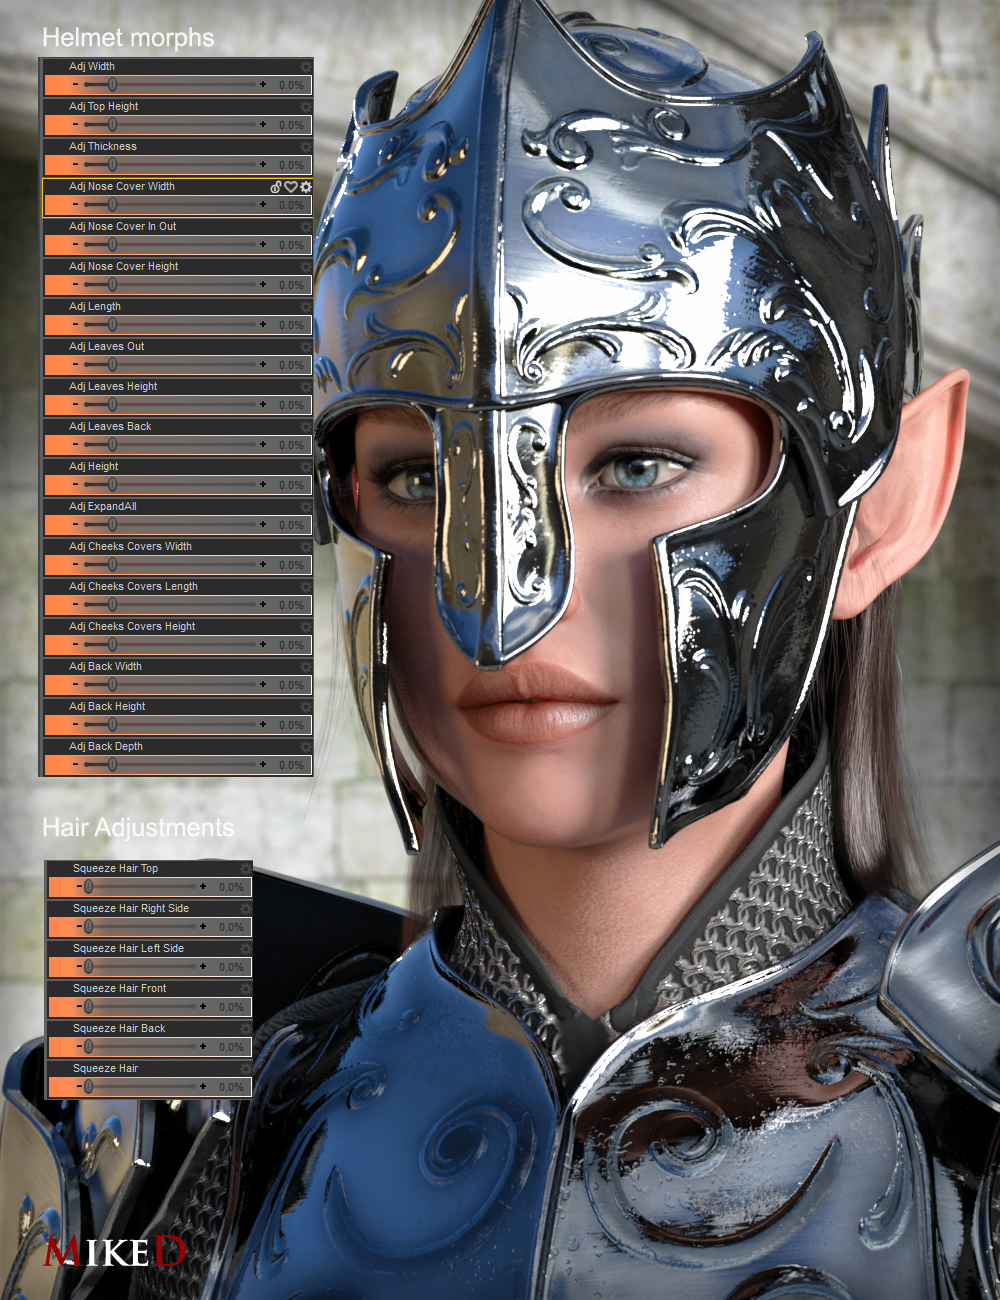 MD dForce HD Elven Royal Armor for Genesis 8 Female(s) by: MikeD, 3D Models by Daz 3D